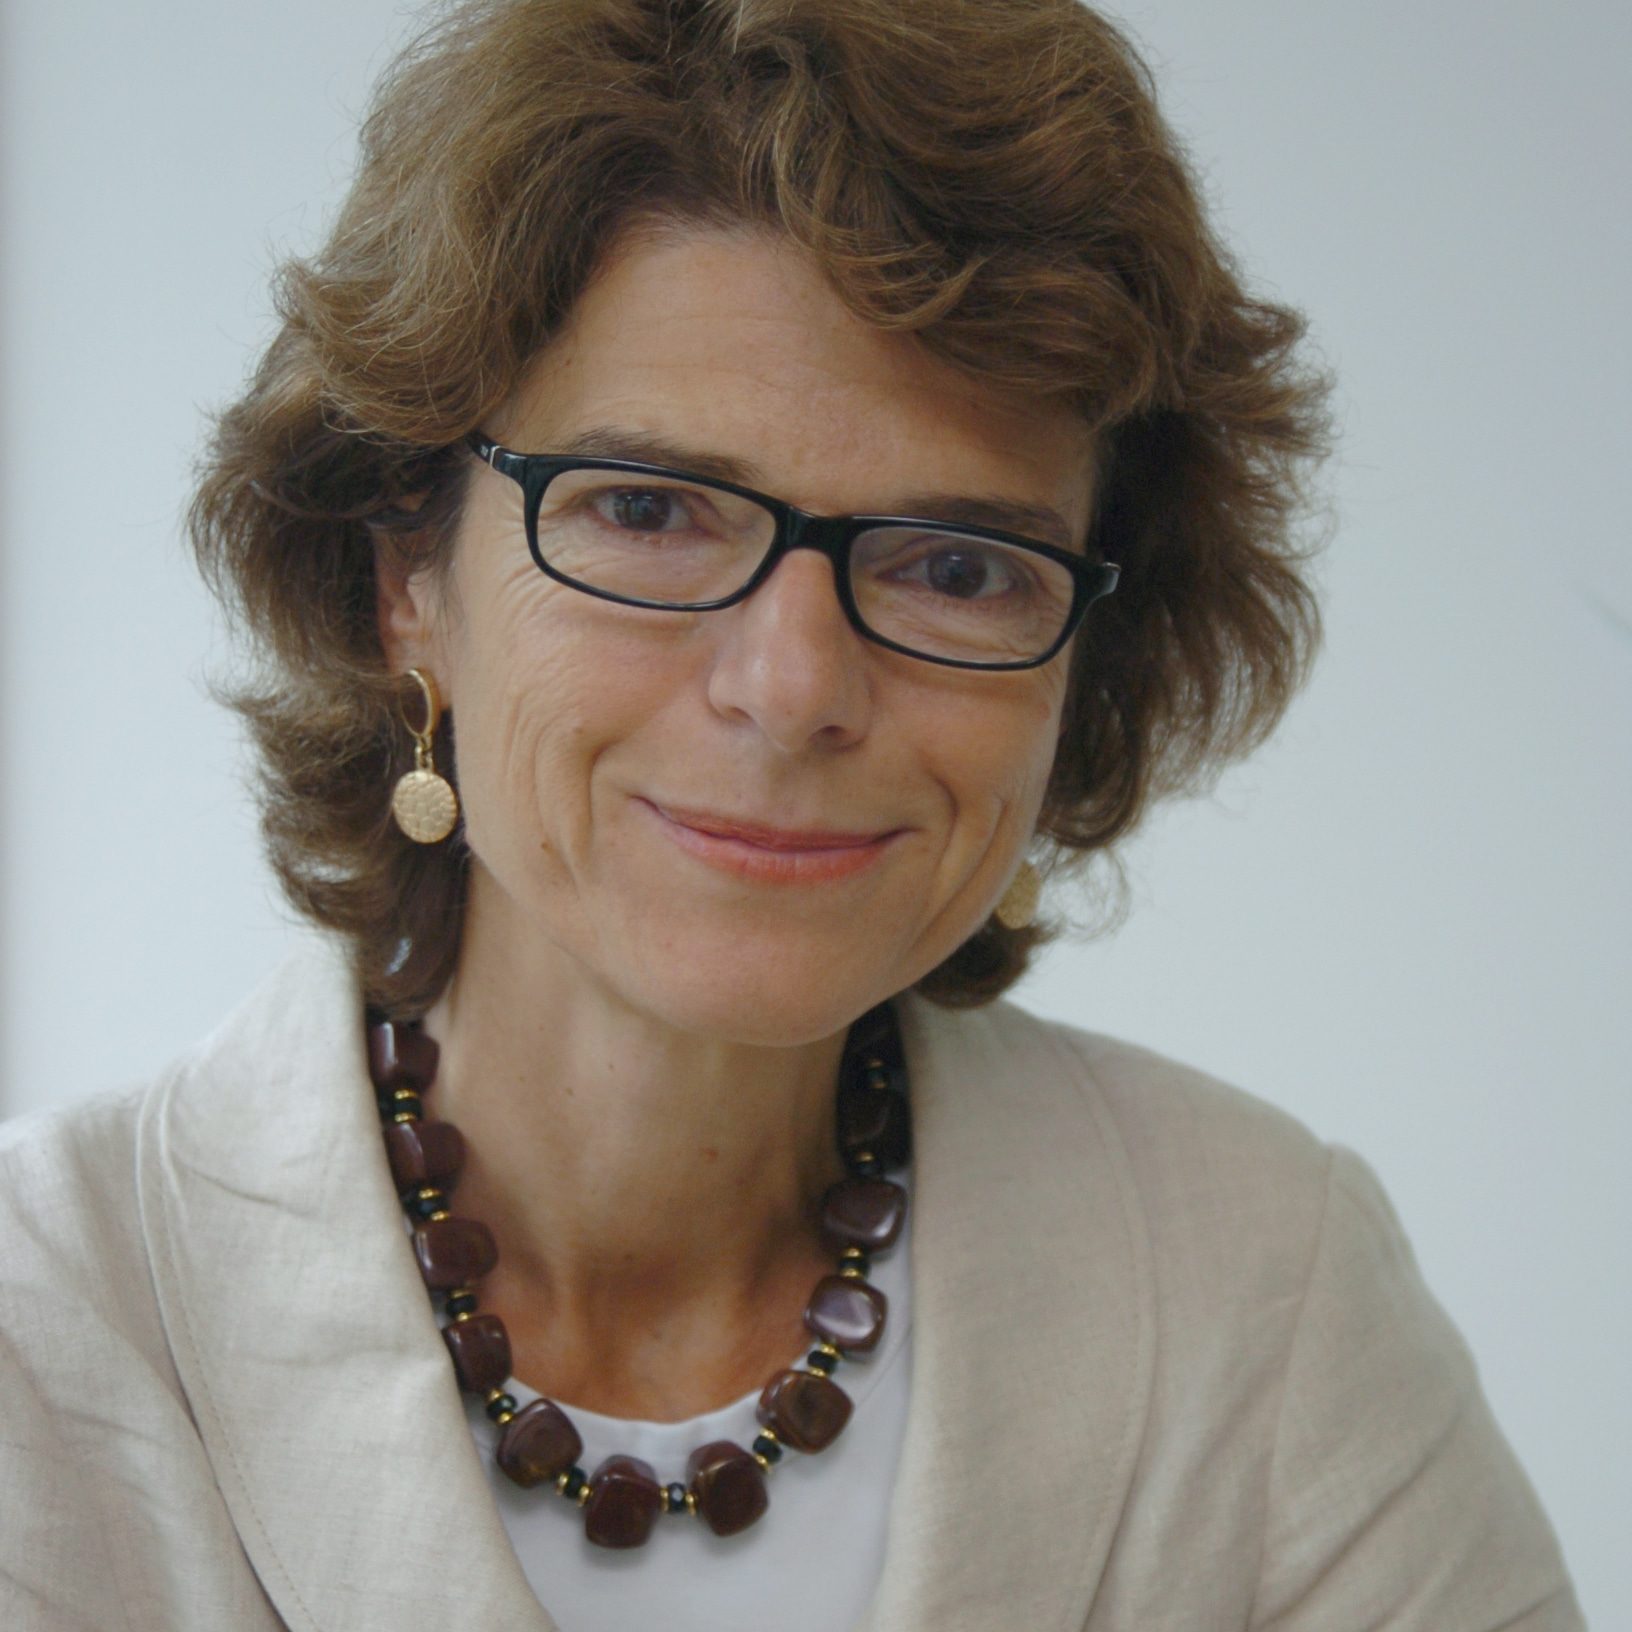 Vicky Pryce is a co-founder and non-executive director of GoodCorporation